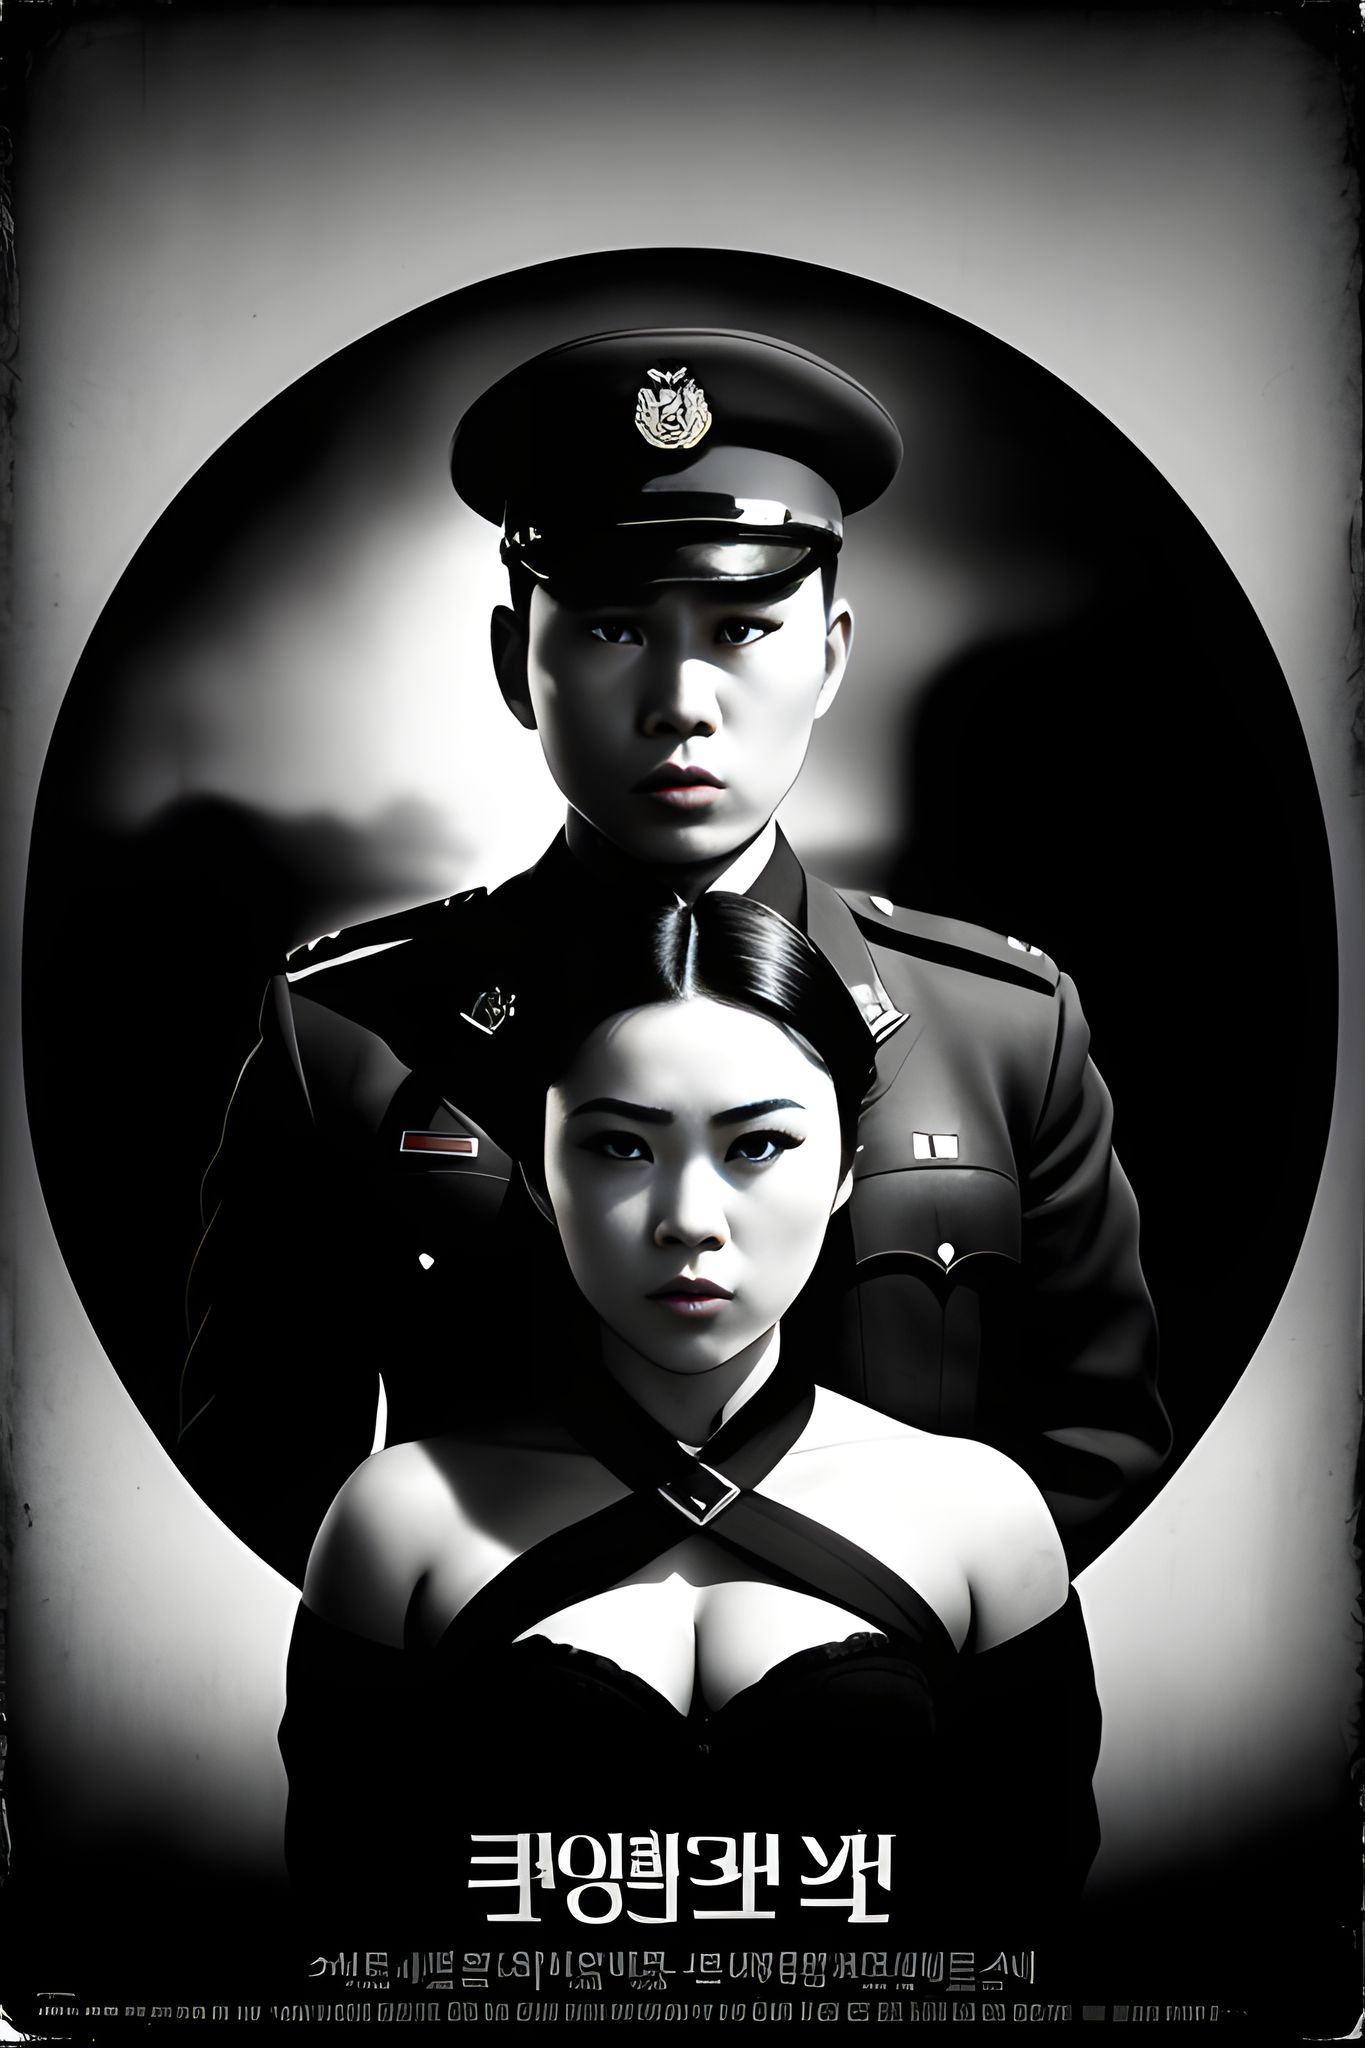 Two-people-Wide-portrait-of-a-North-Korean-soldier-9job